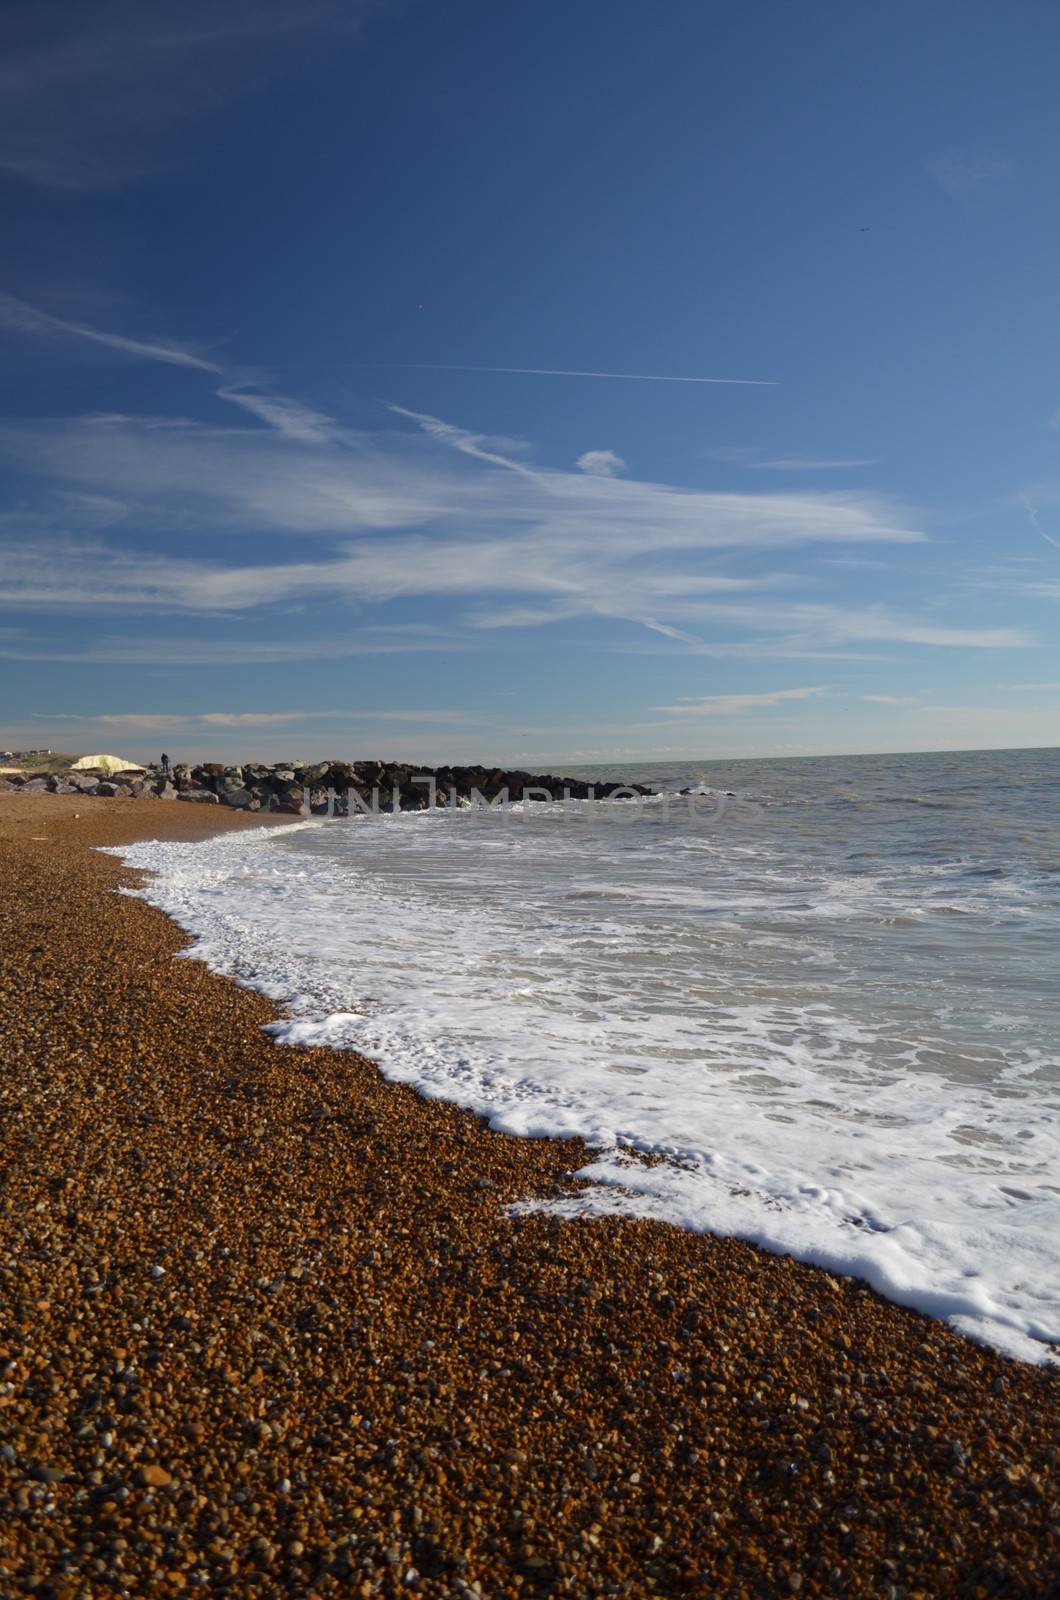 Brighton in Sussex,England with its famous pebble beach.